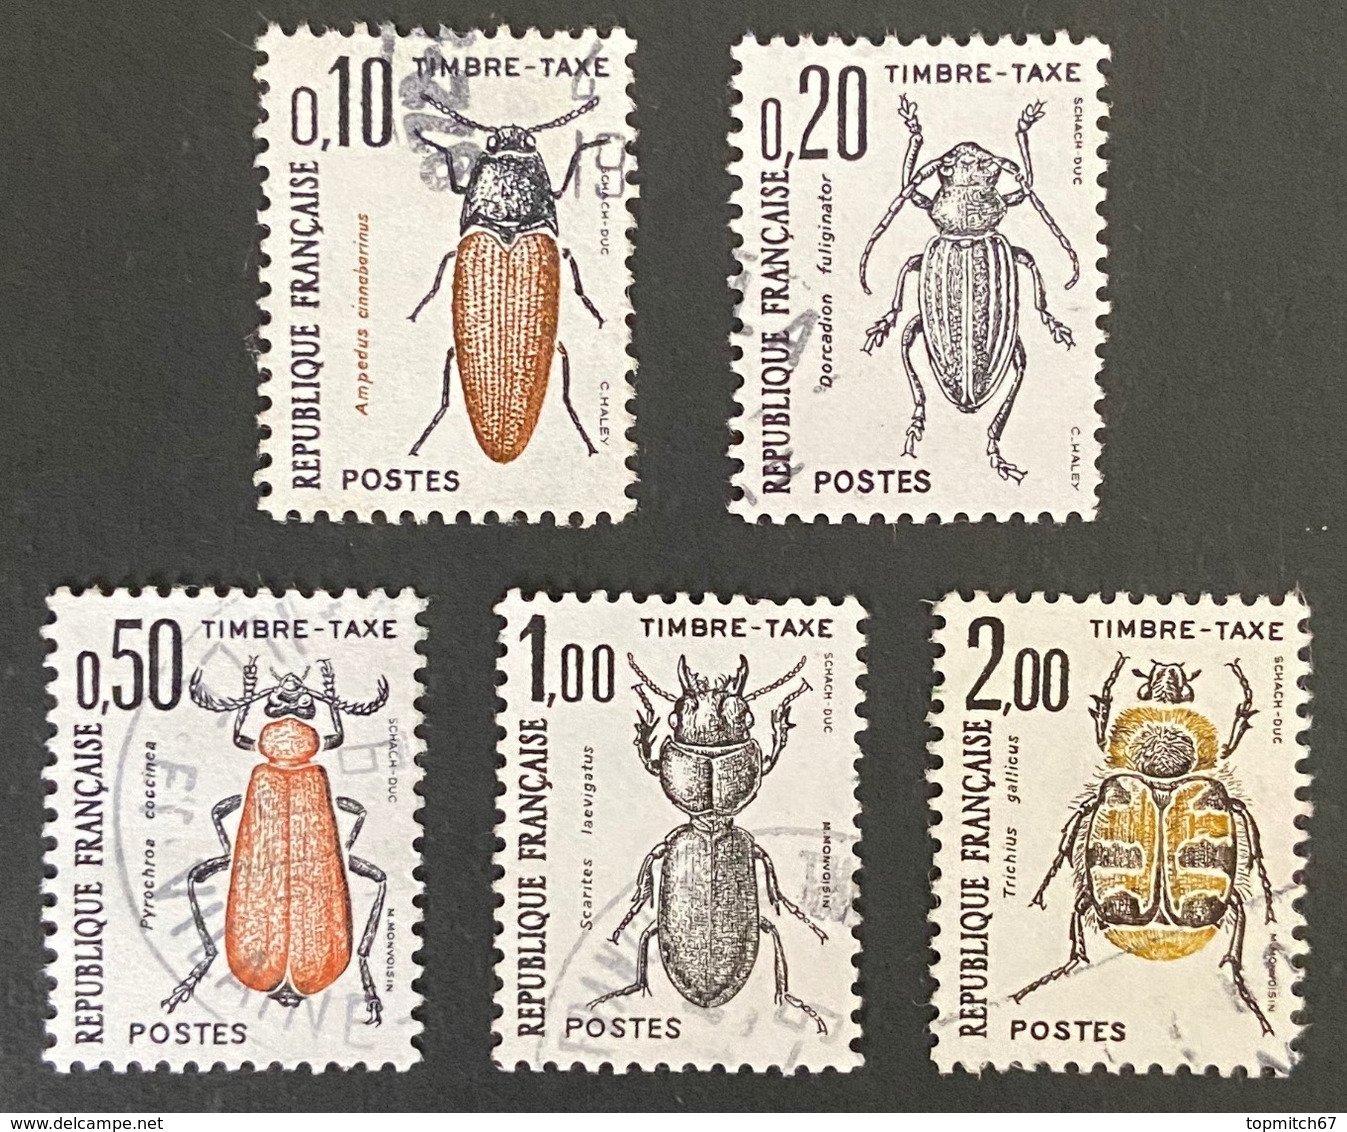 FRAYX103-07U - Timbres Taxe Insectes Coléoptères (I) Set Of 5 Used Stamps 1982 - France YT YX 103-07 - Marche Da Bollo